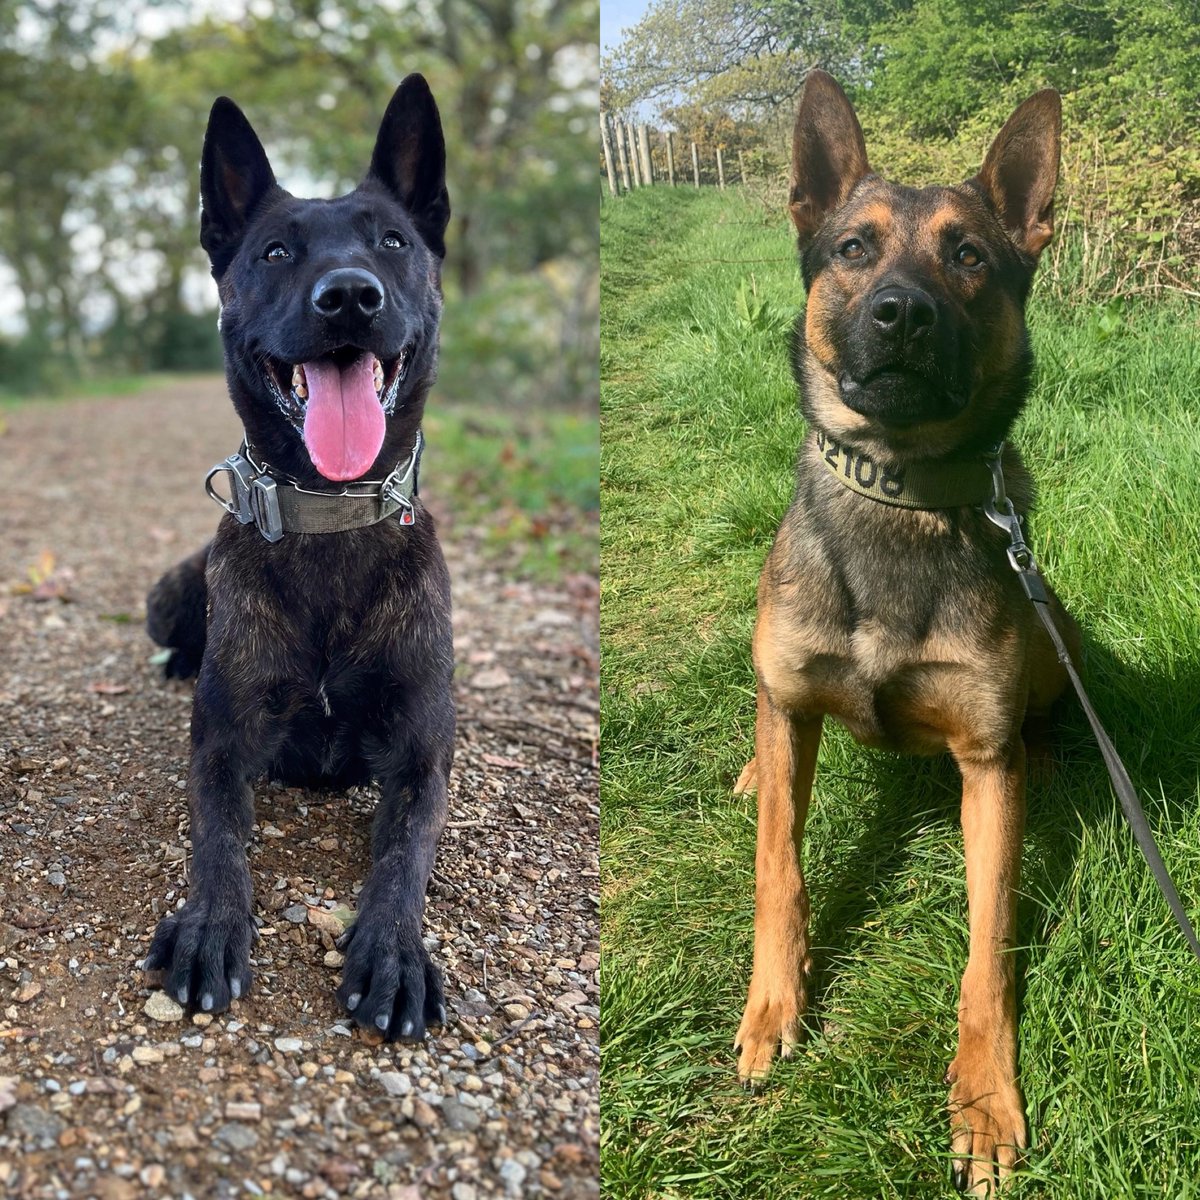 Teamwork is dreamwork! PDs Kratos and Arlo pounced on two burglars caught in the act whilst breaking into a premises last night, along with @NWPRPU, @CheshNWalesAAP, @NWPDrones and @NWPDenbighCoast. Two in custody #GreenTeam #PDKratos #PDArlo